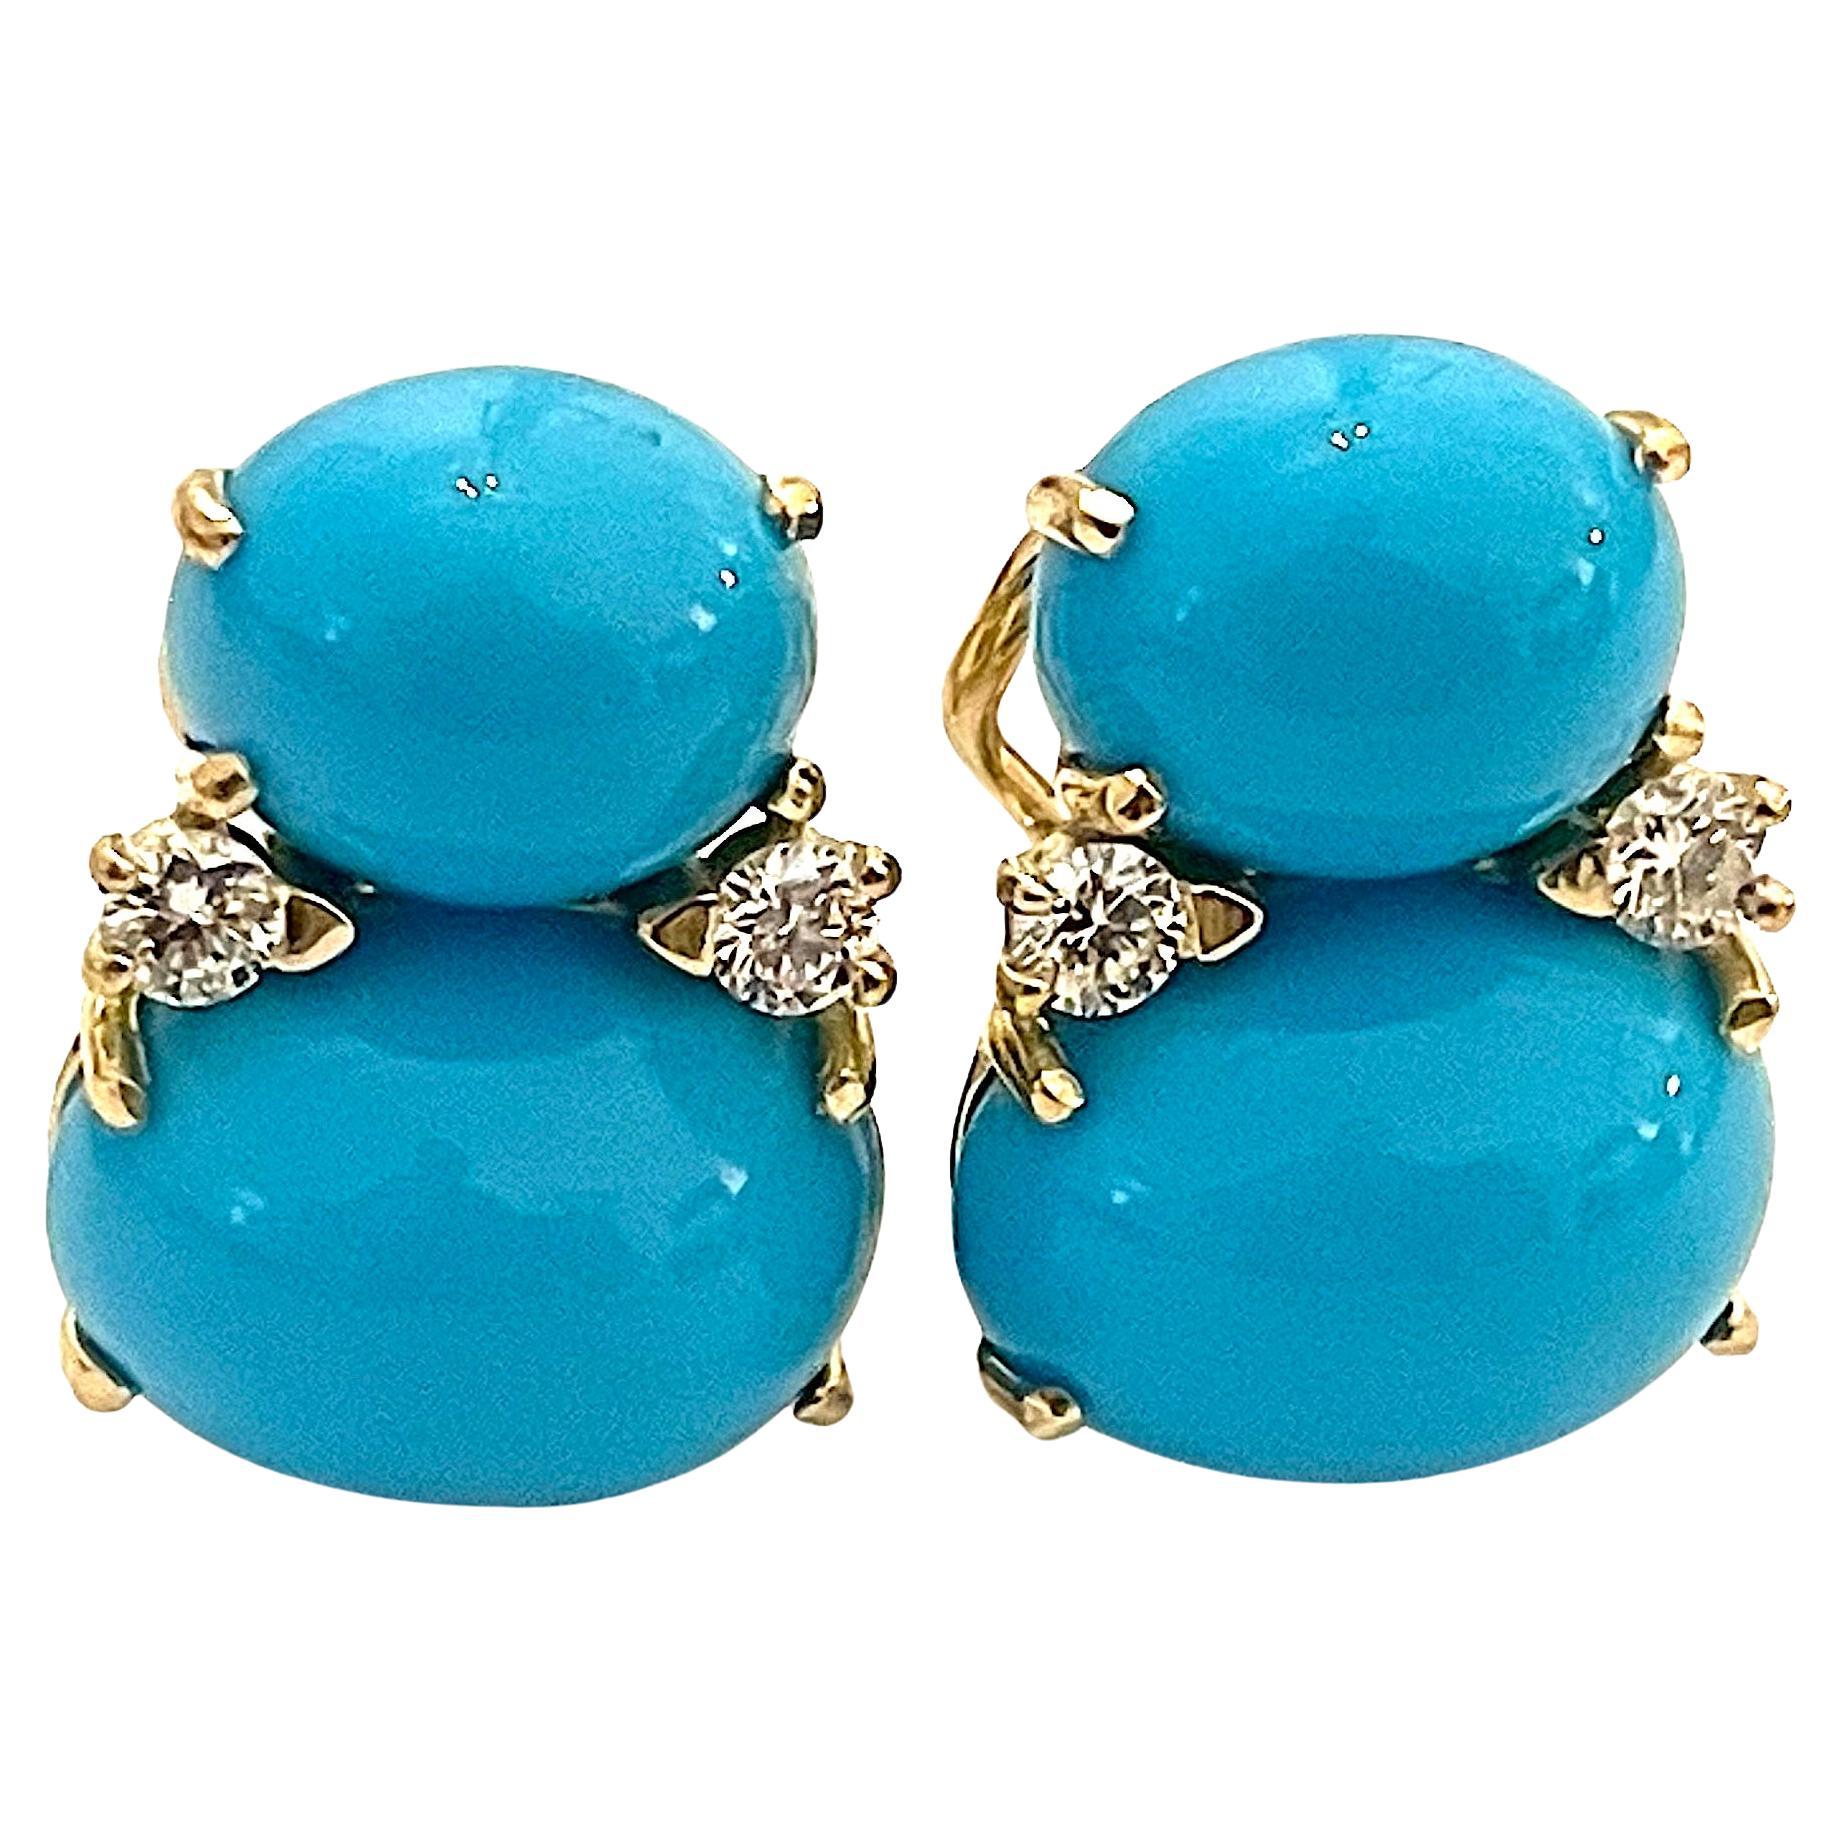 Christina Addison Bespoke 18kt Yellow Gold Large  GUM DROP™ Earrings with Cabochon Turquoise and four diamonds ~-.50cts  A real Statement!

The stones are graduated - measuring 5/8